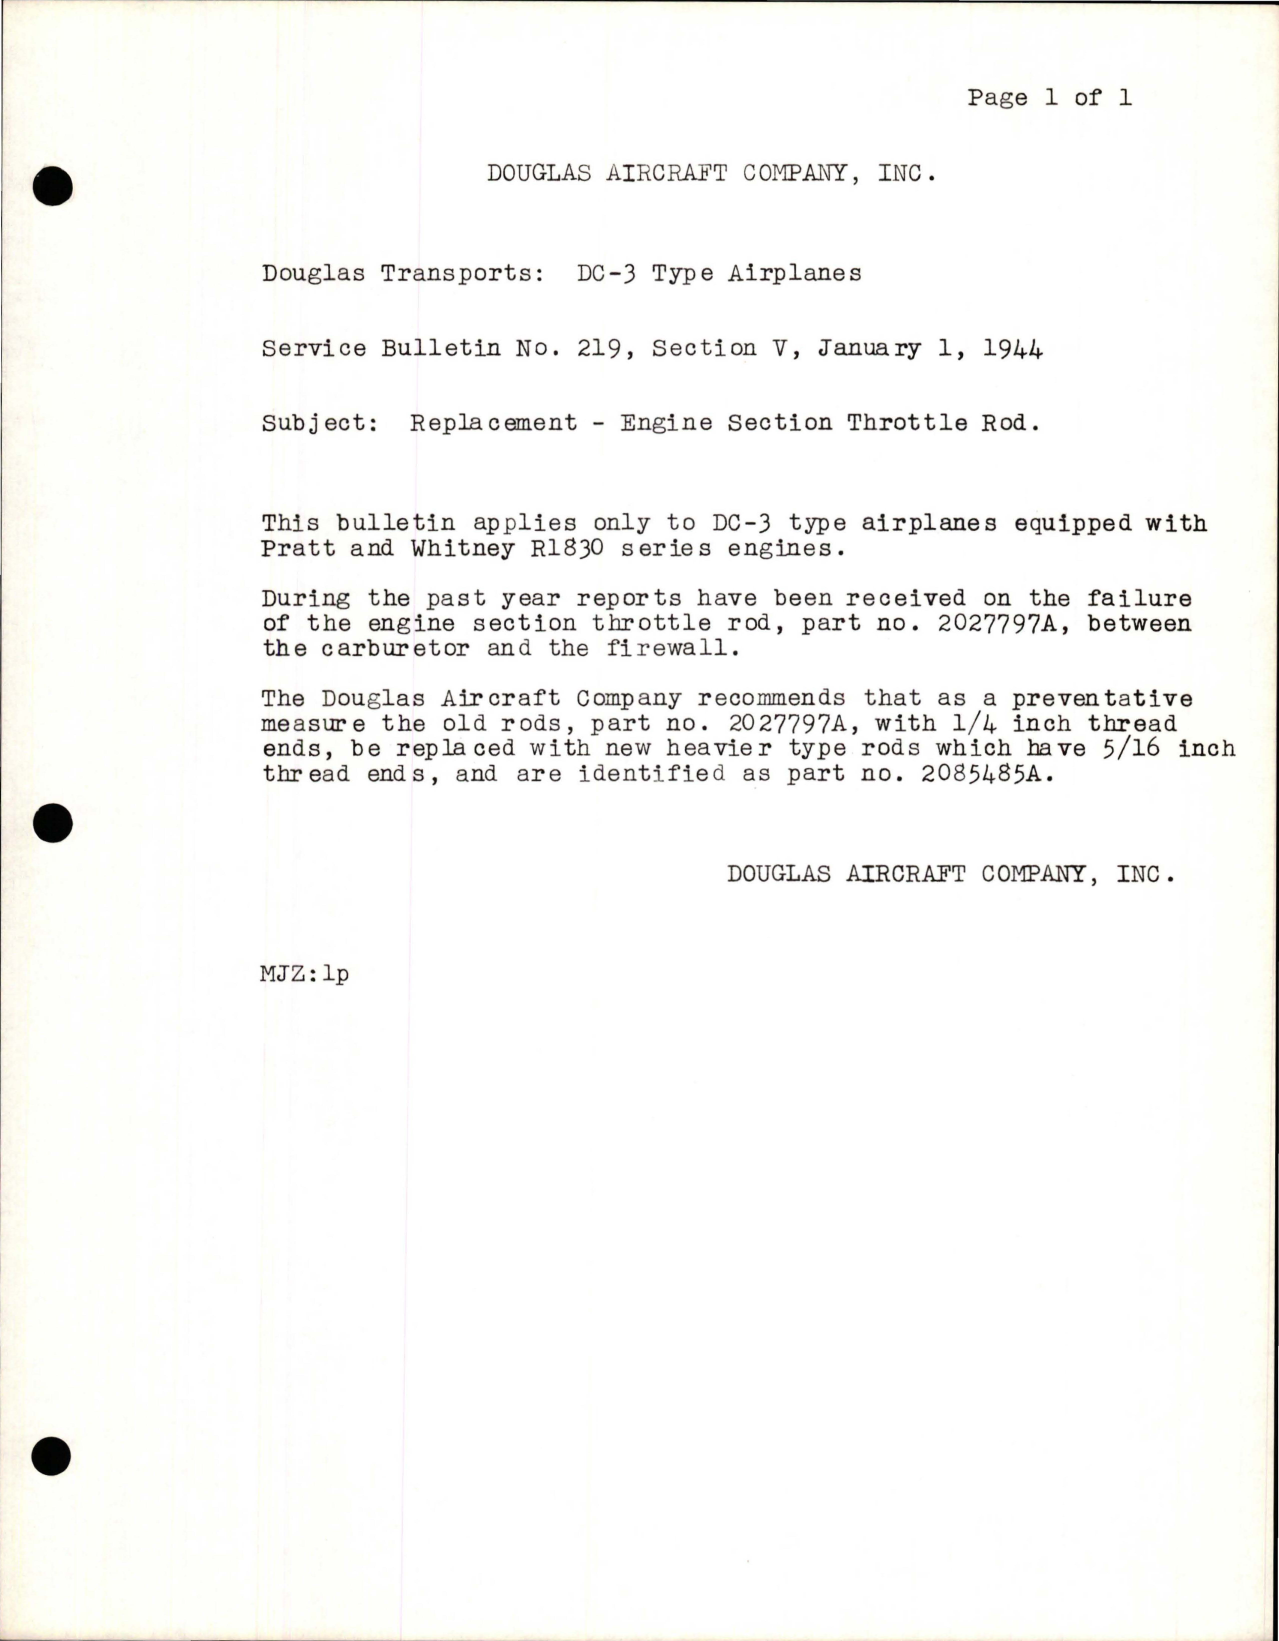 Sample page 1 from AirCorps Library document: Replacement of Engine Section Throttle Rod